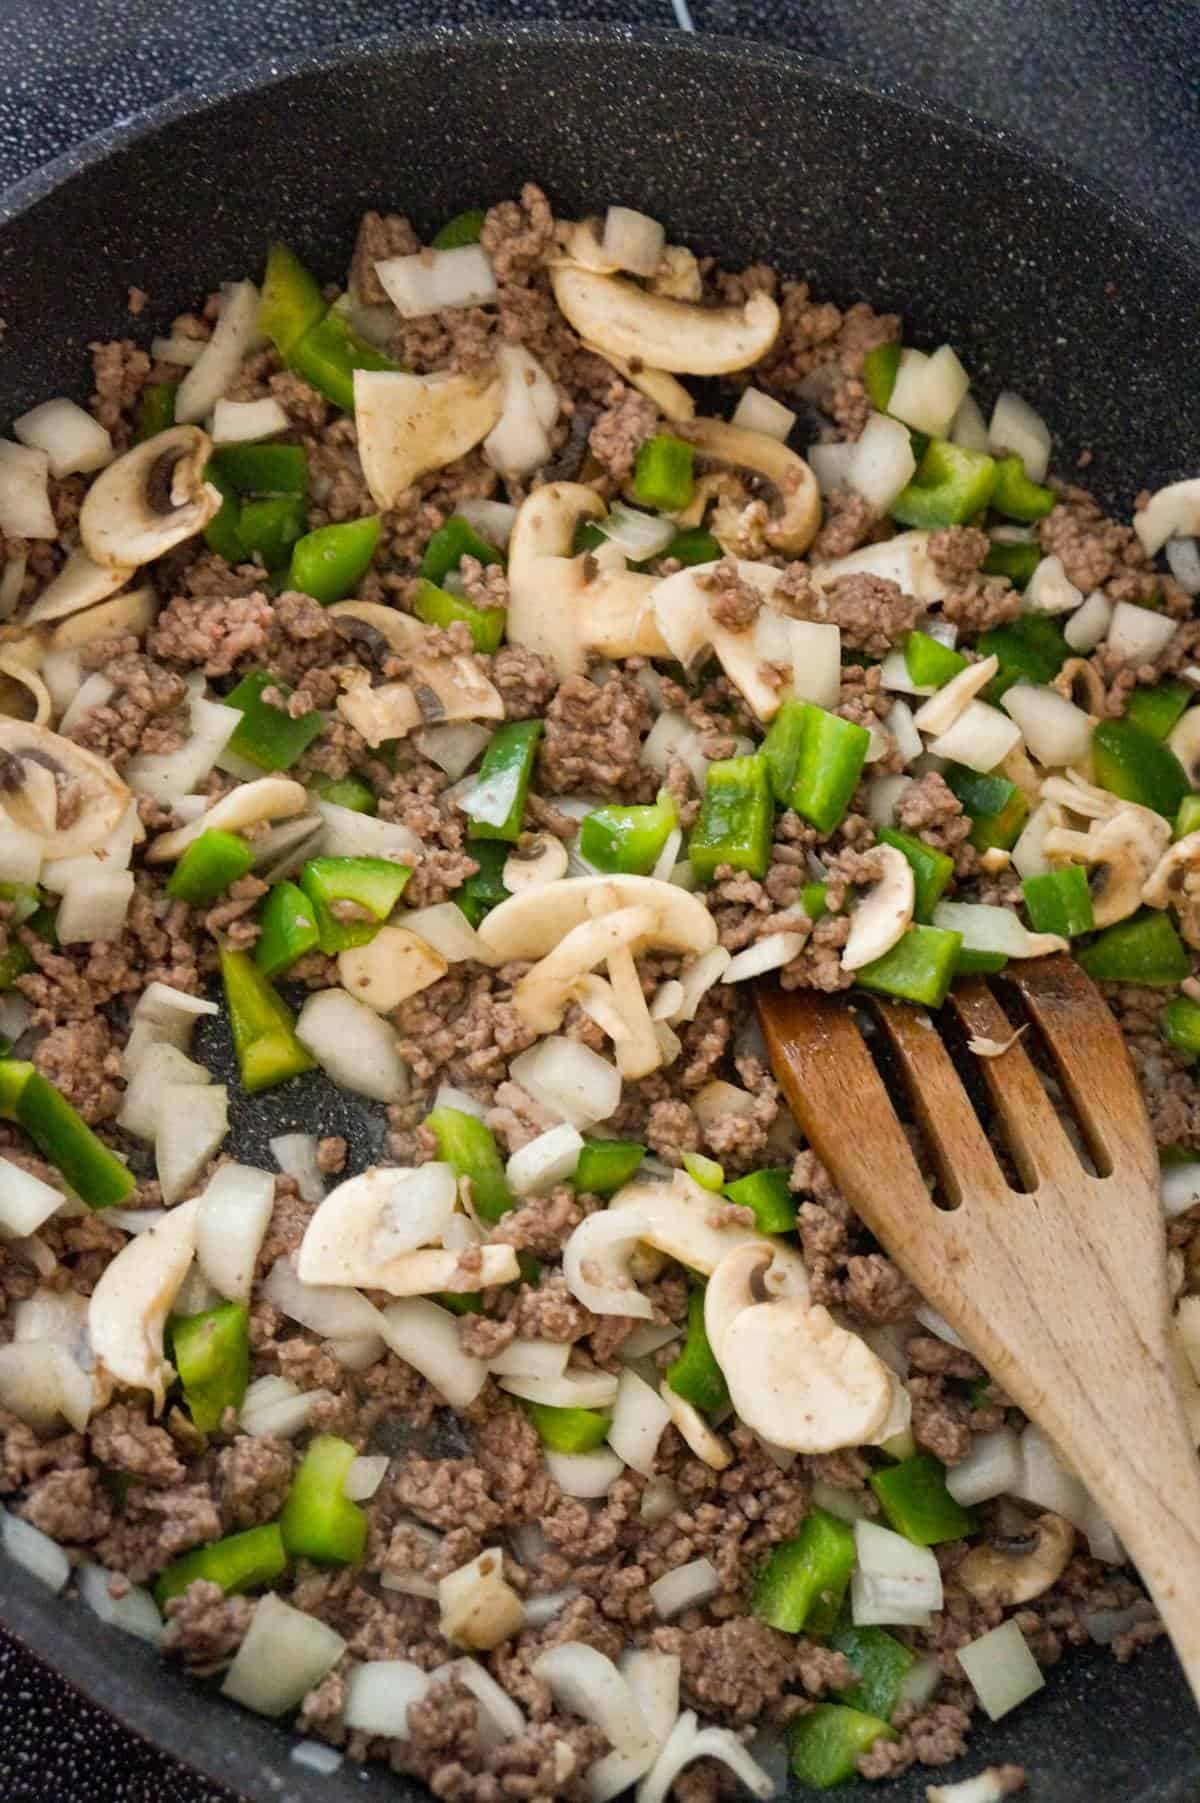 sliced mushrooms, diced green peppers and ground beef cooking in a saute pan